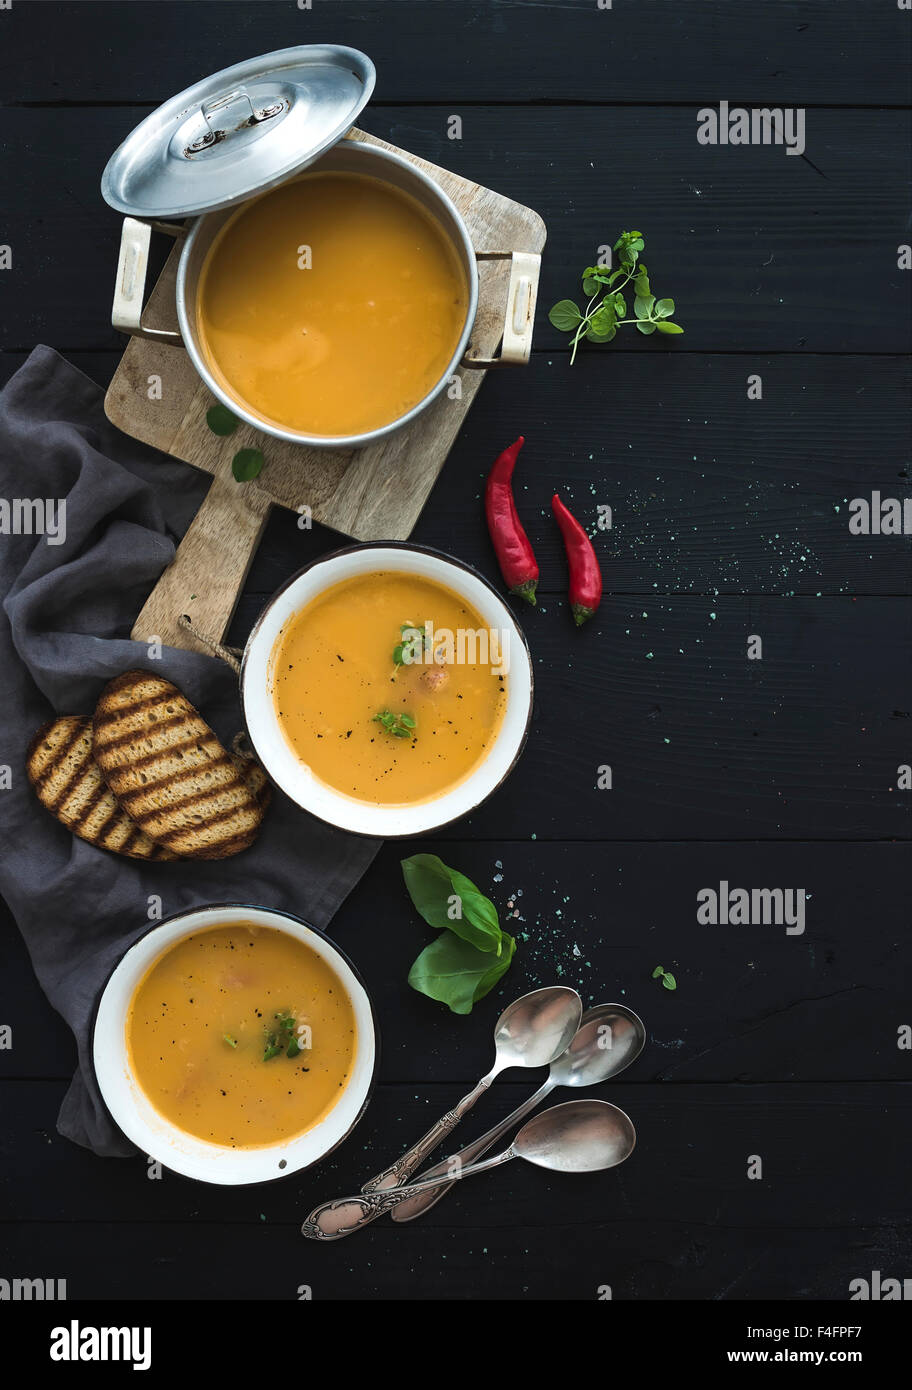 Red lentil soup with spices, herbs, bread in a rustic metal saucepan and bowls, over dark wood backdrop, top view, vertical, cop Stock Photo